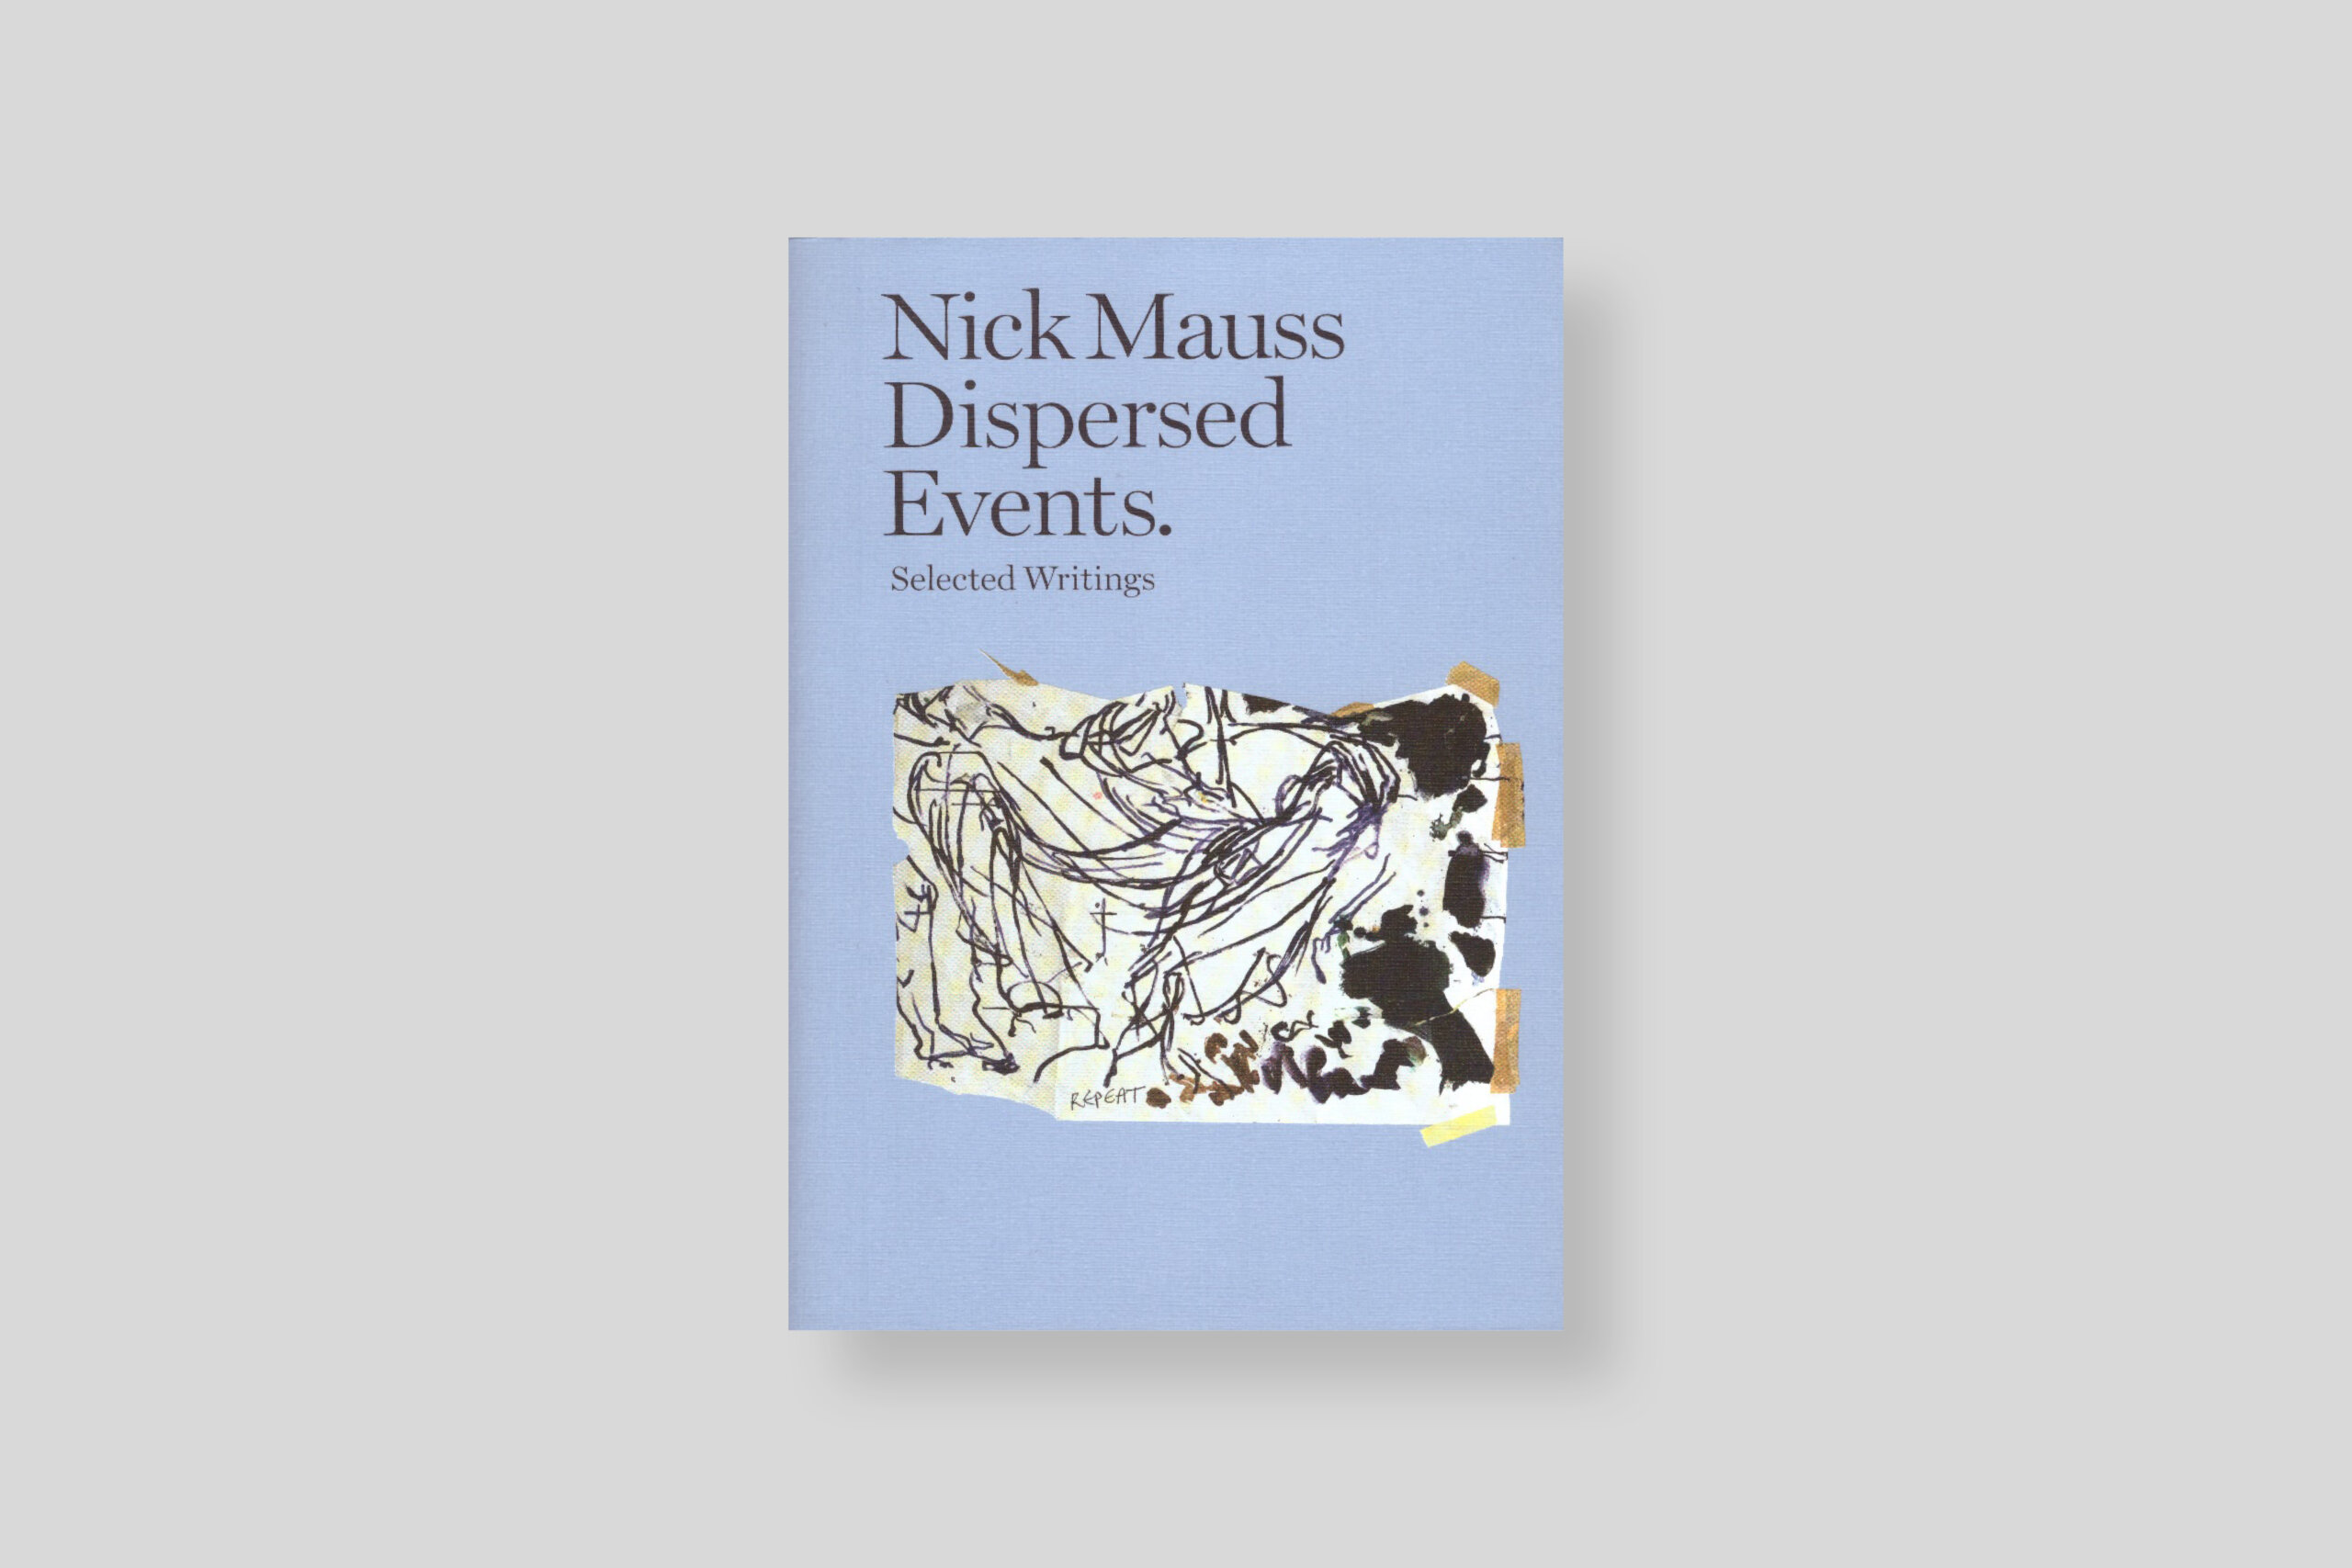 nick-mauss-dispersed-events-selected-writings-after-8-books-cover